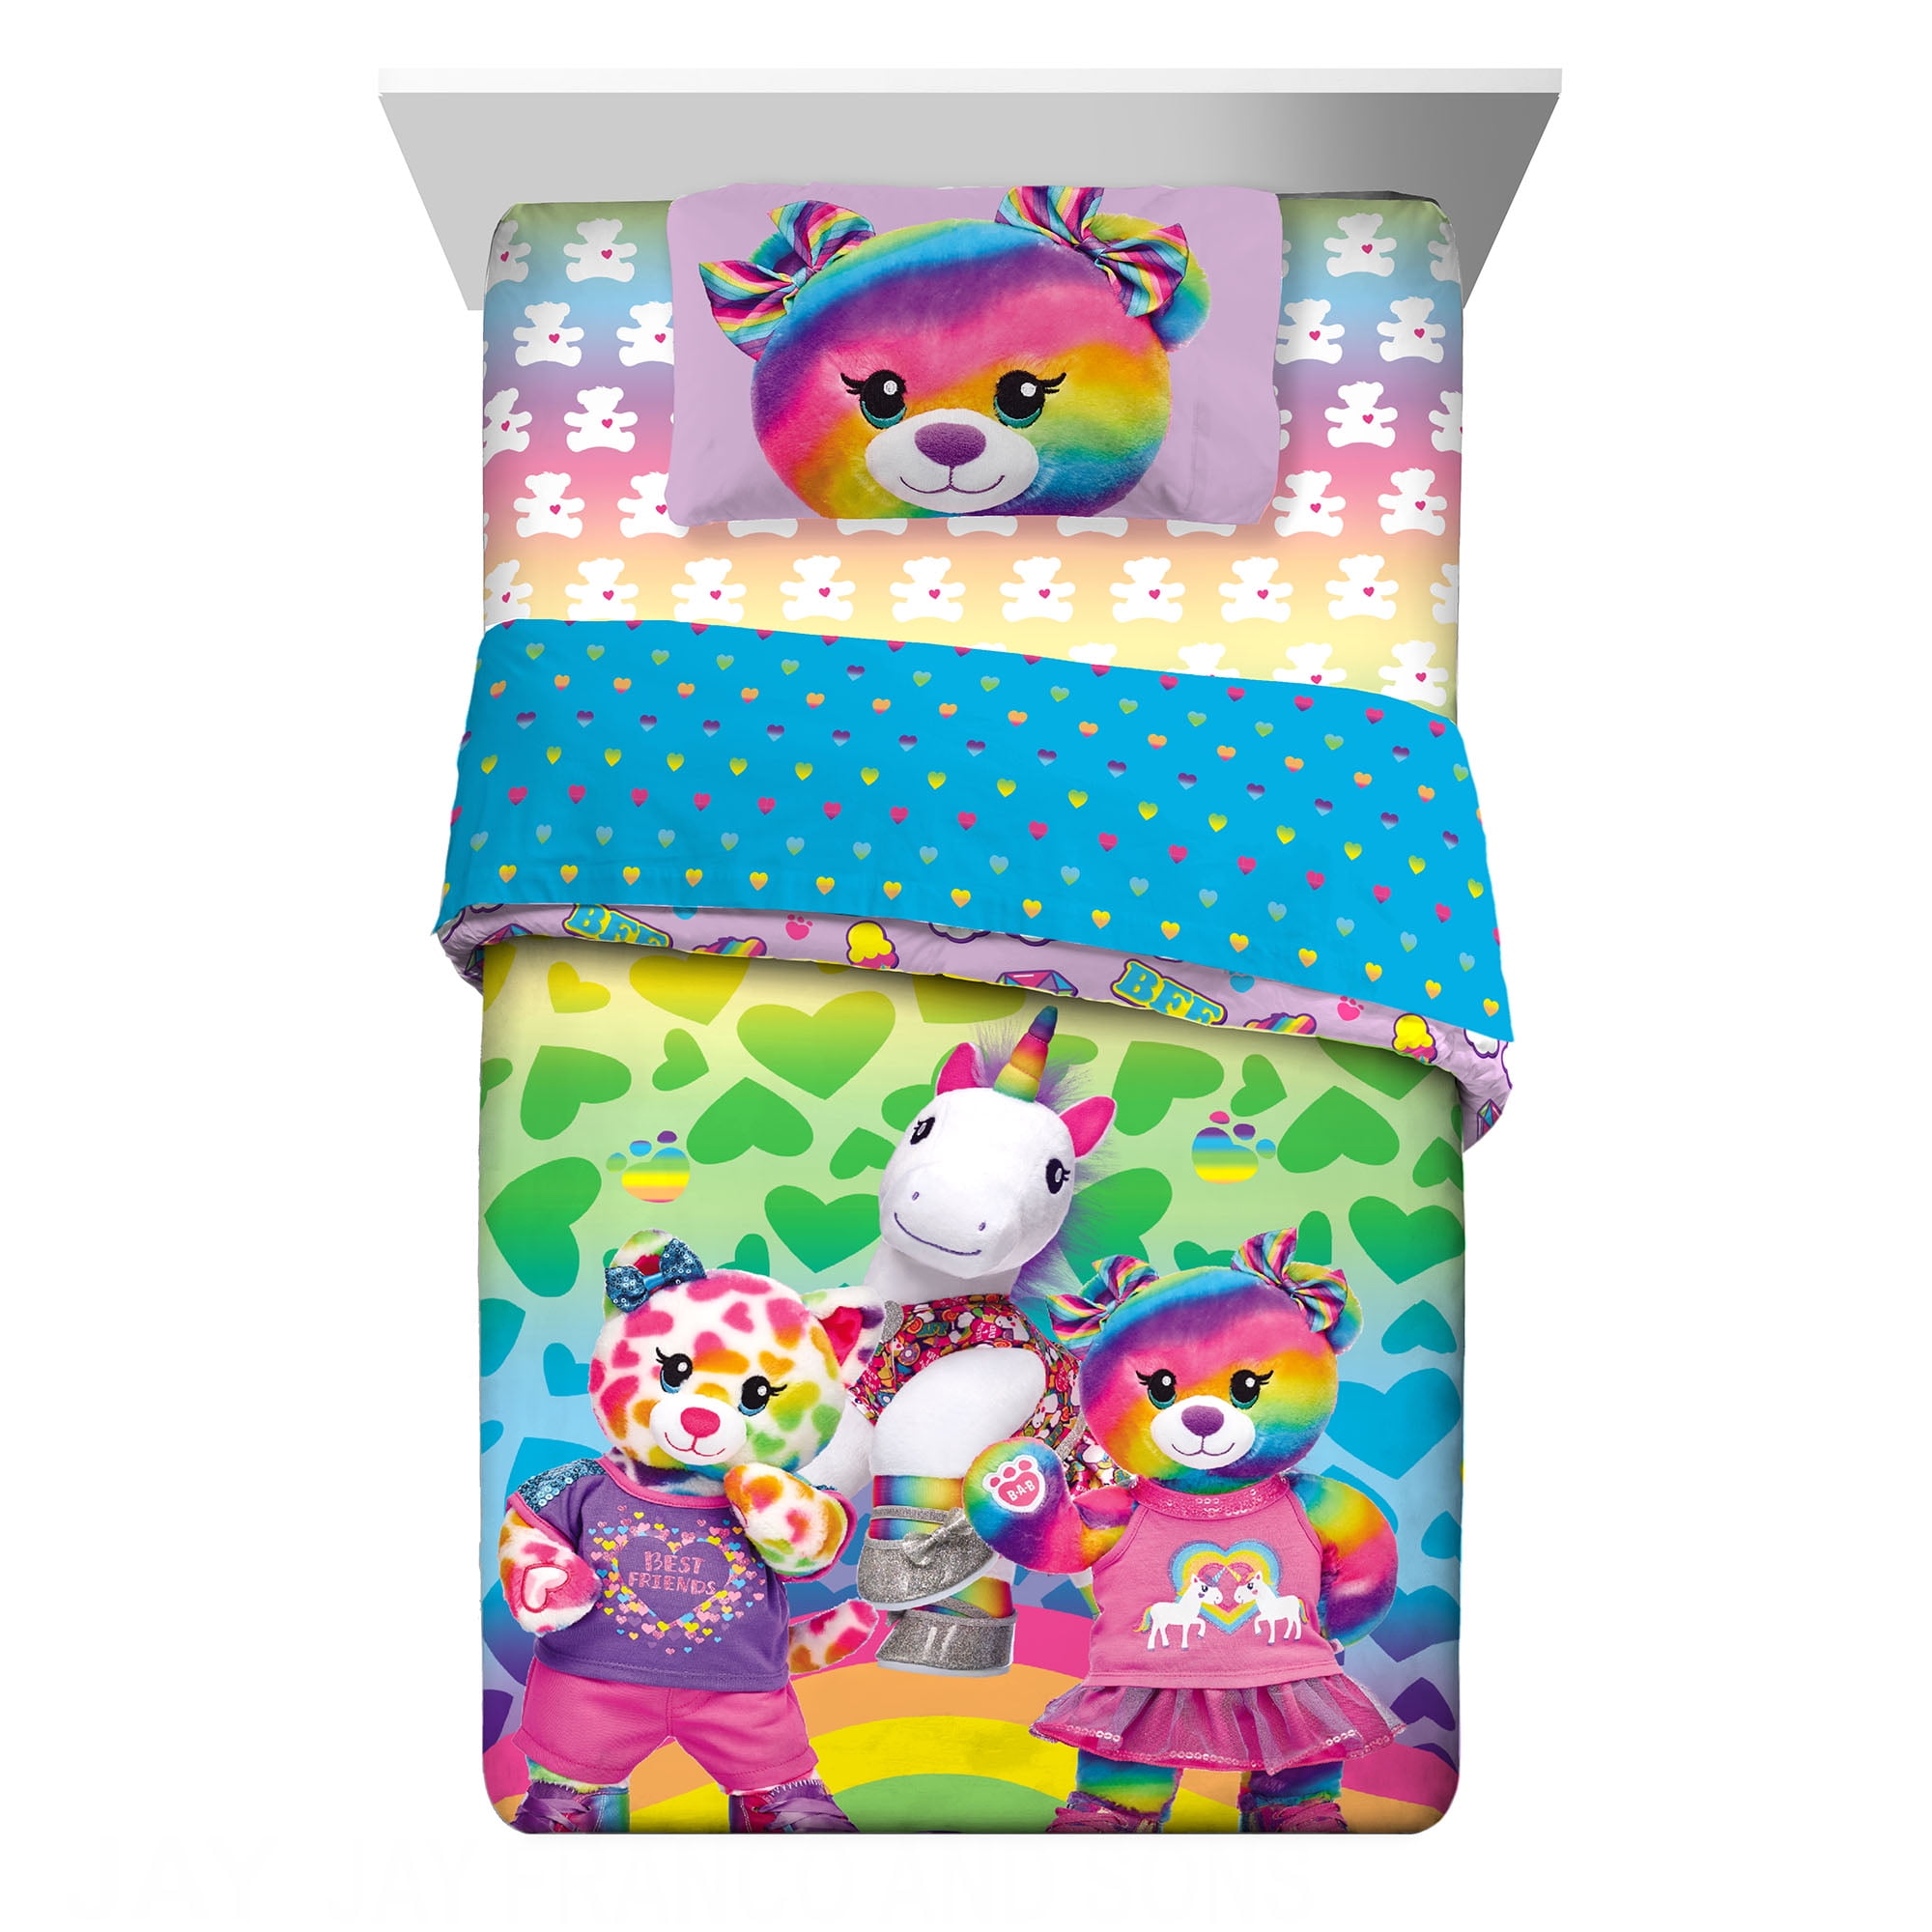 Pink and White Heart Shopkins StandardQueen and Toddler Pillowcase